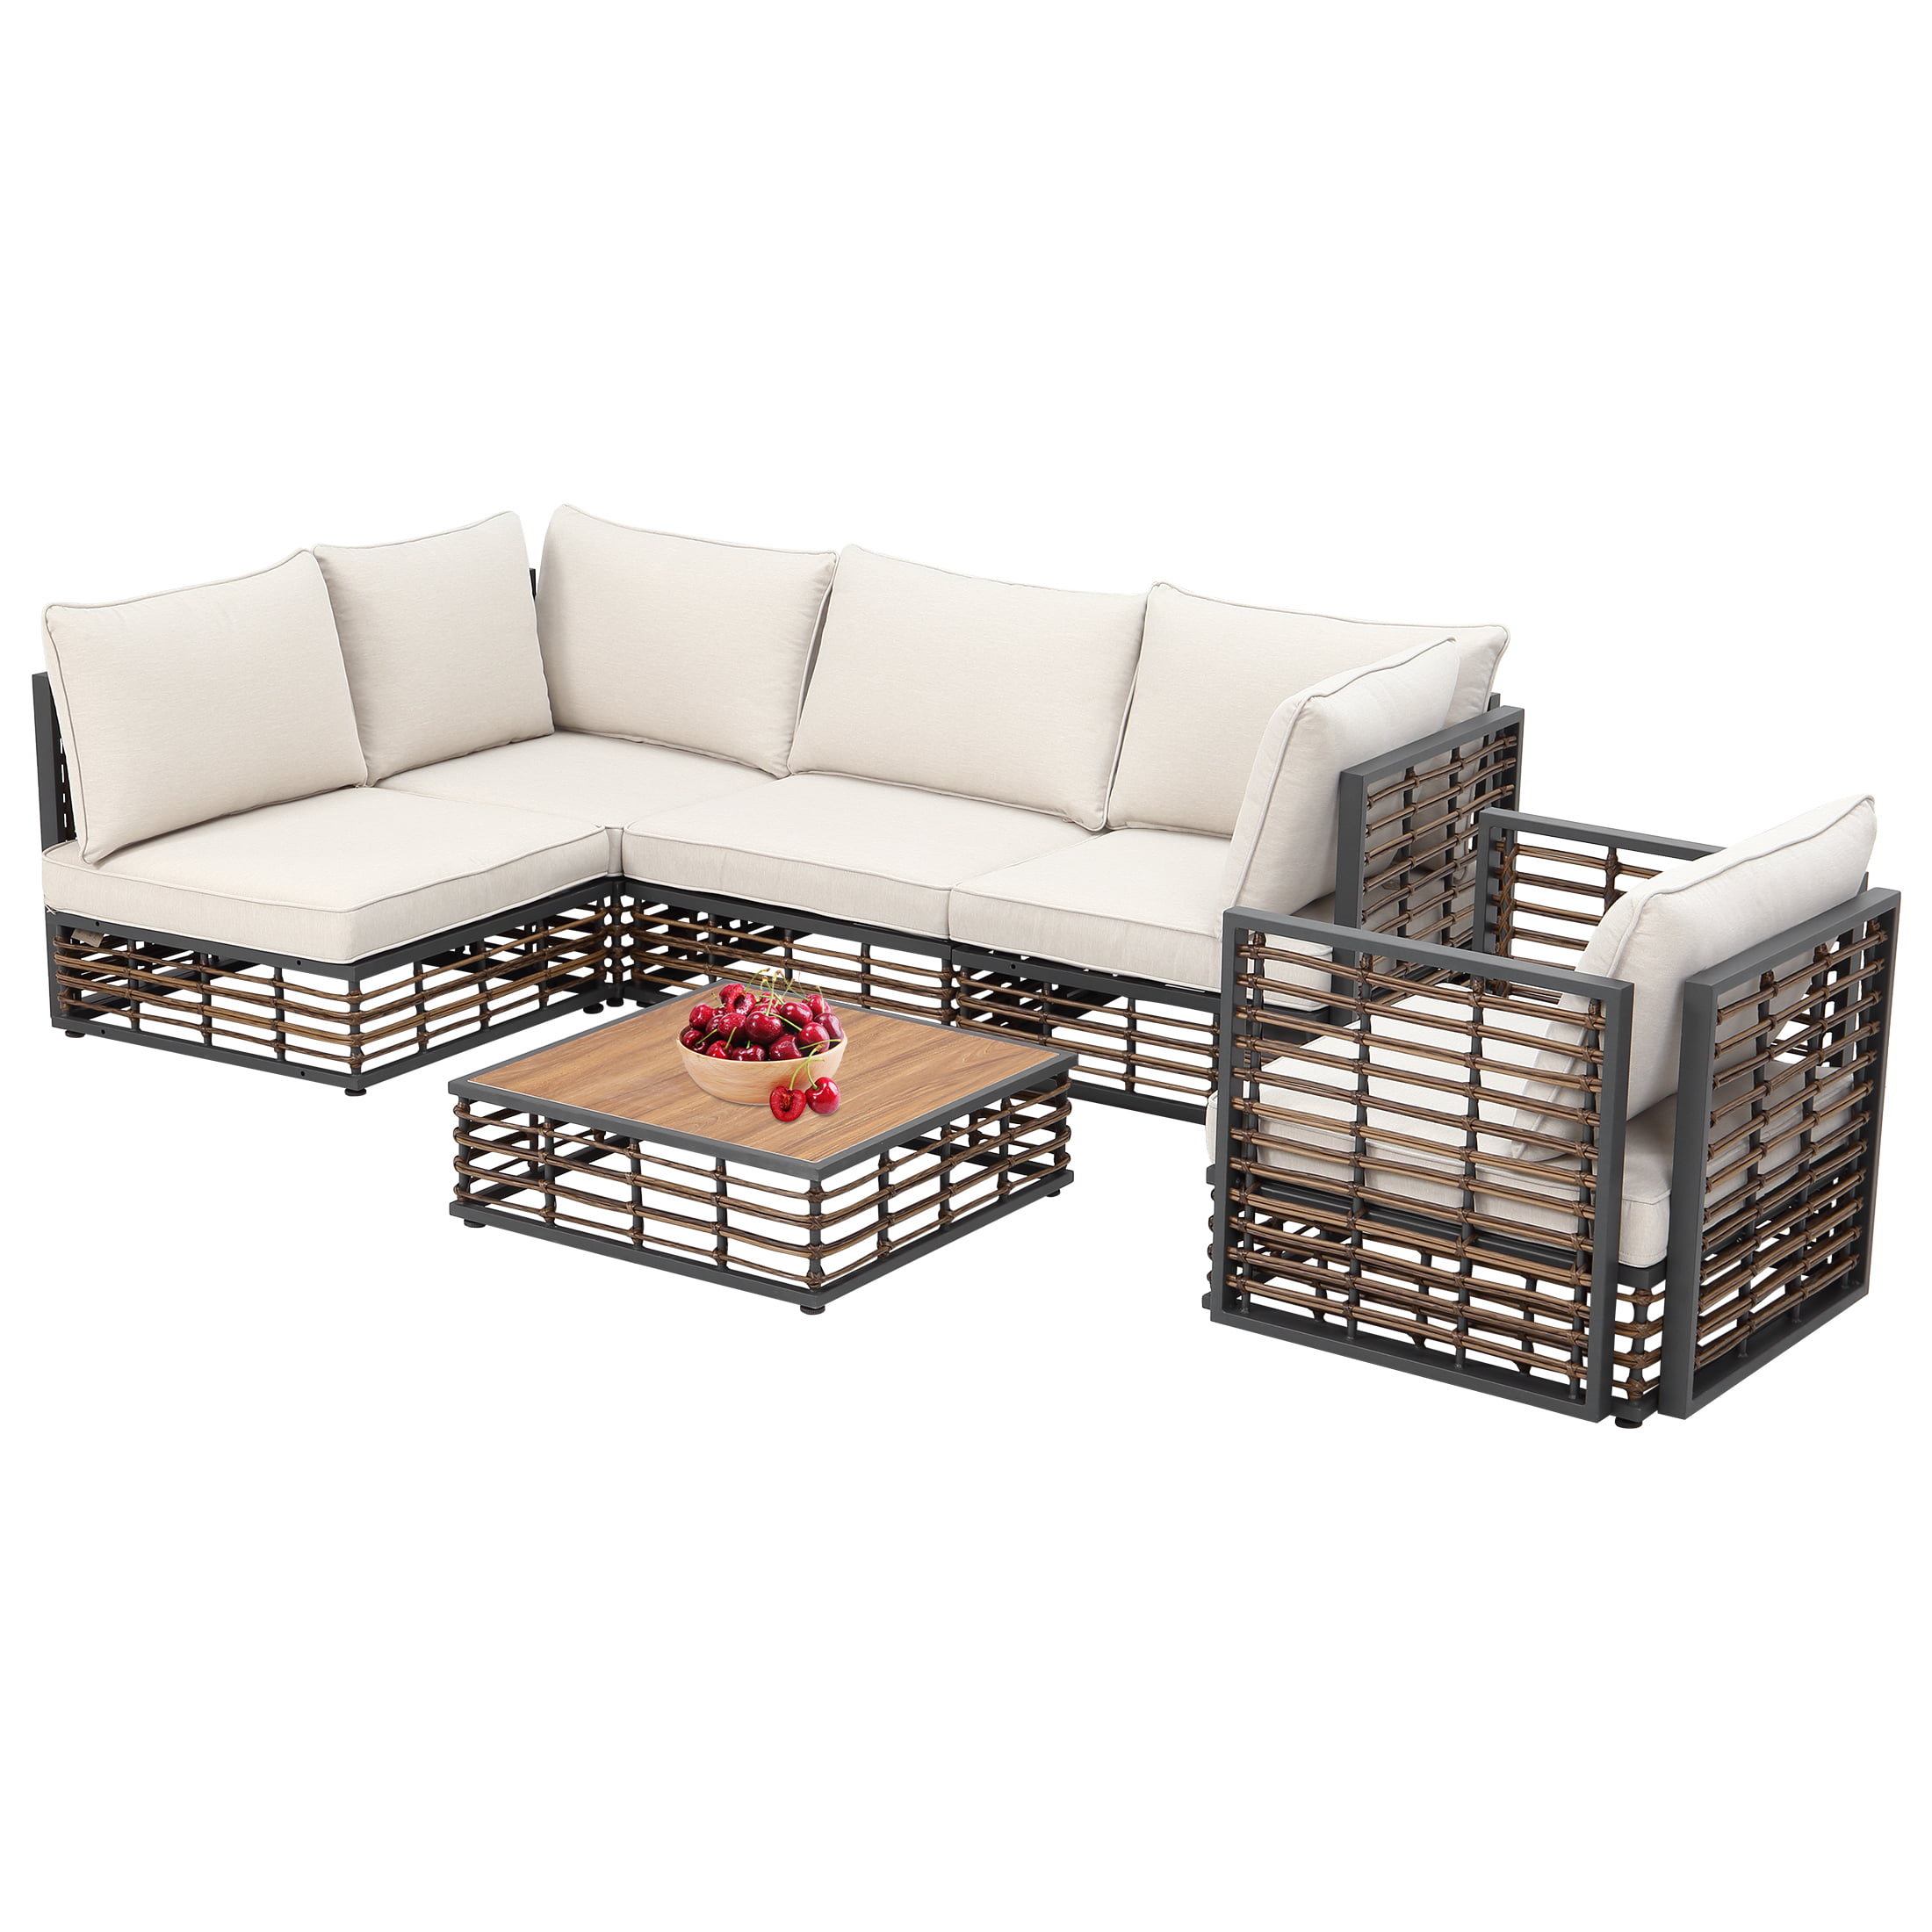 AECOJOY 6 Pieces Outdoor Patio PE Rattan Wicker Sofa Cushioned Sectional Furniture Set with Pillows